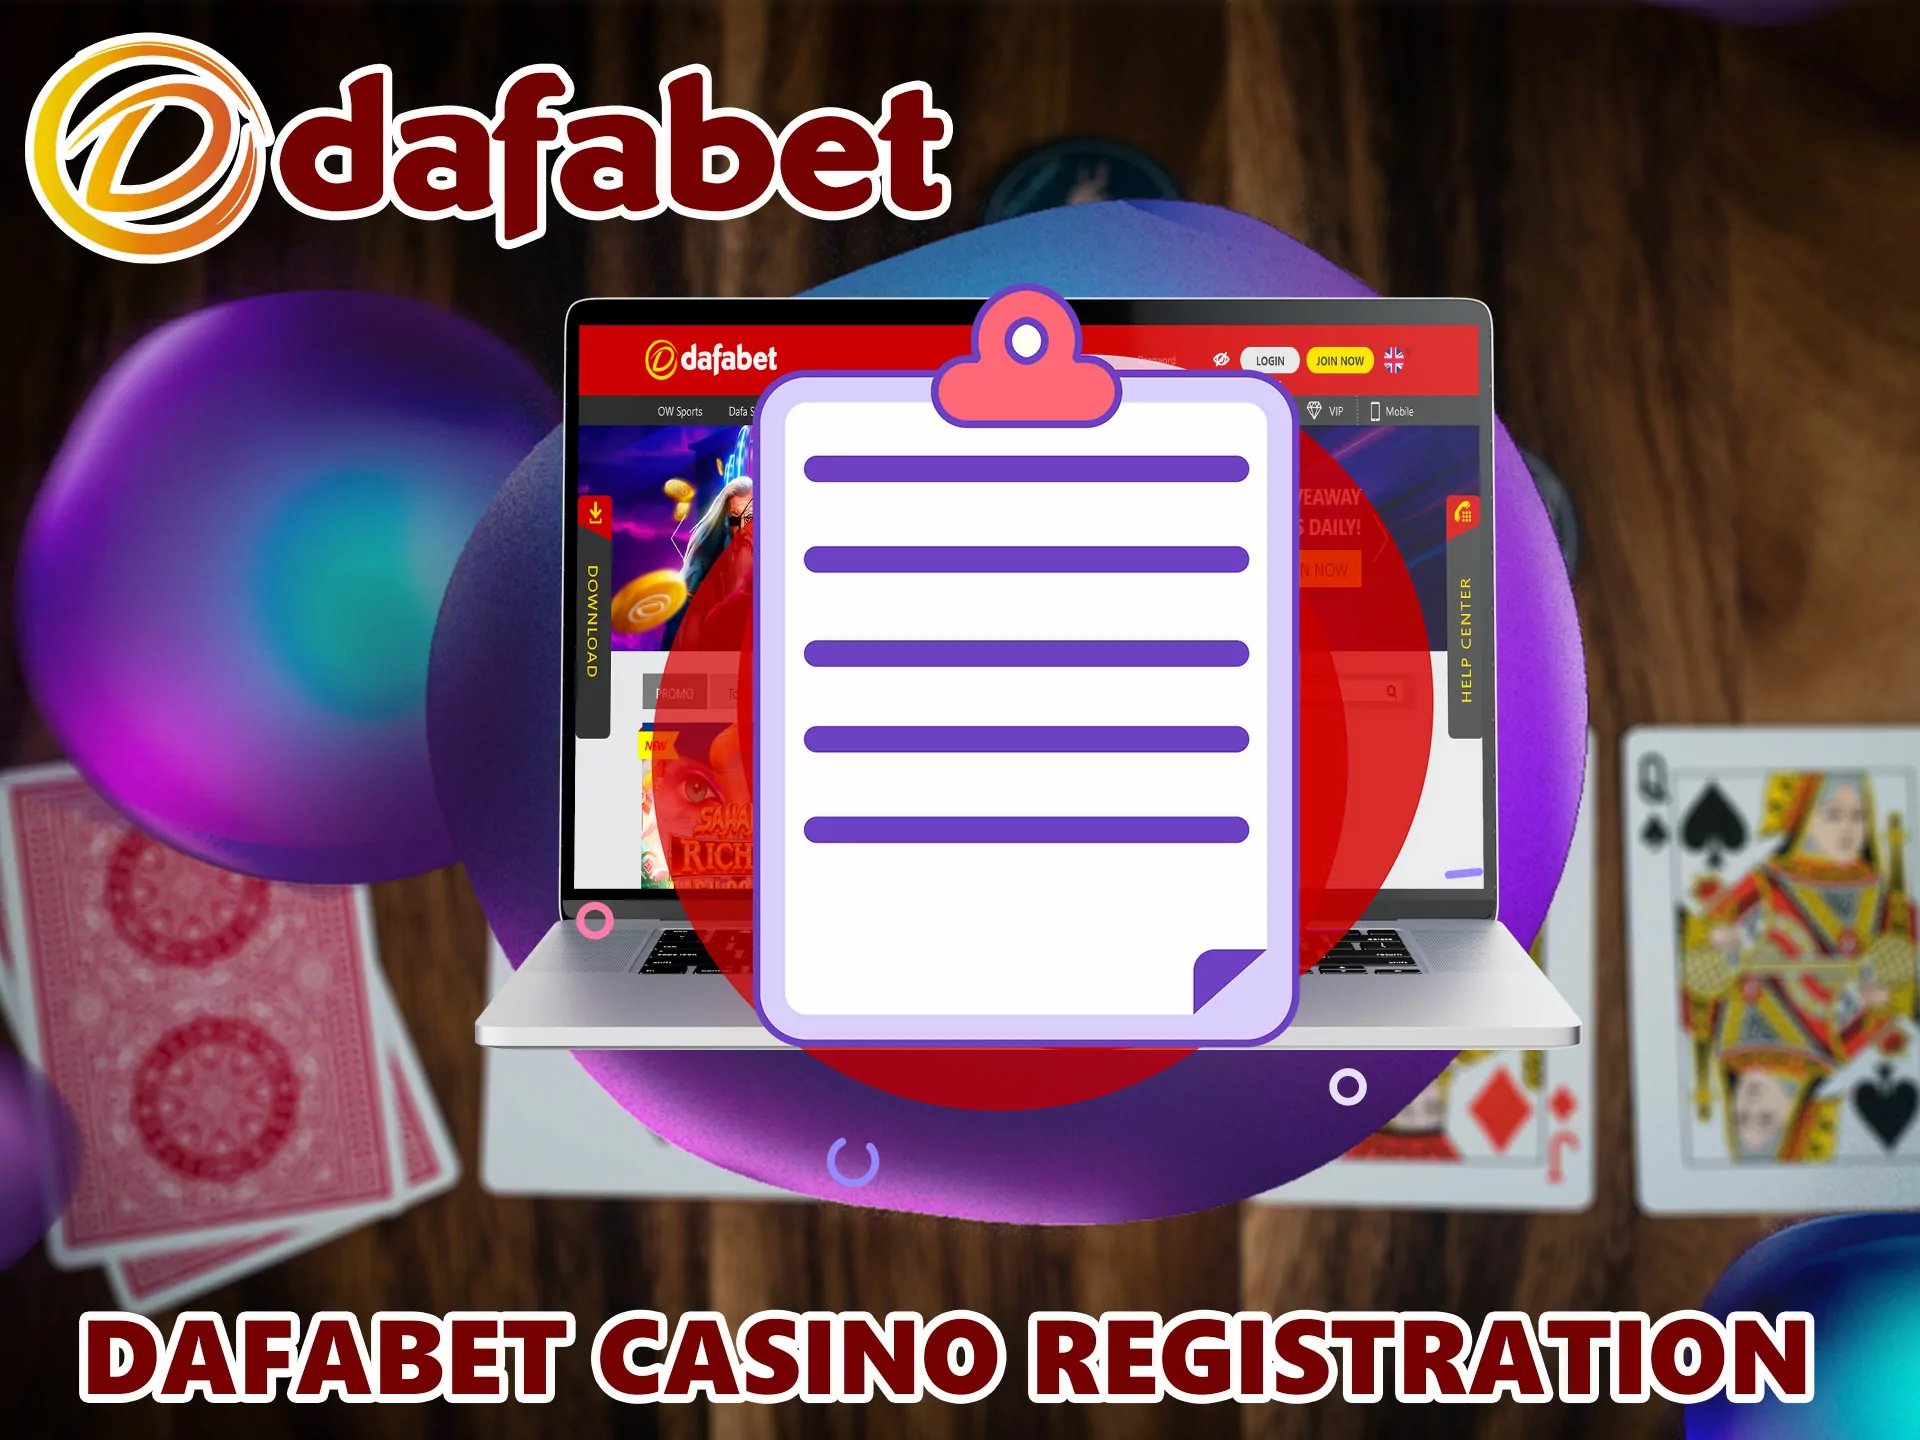 Start playing at the casino, just enter your data to then log in to the site.